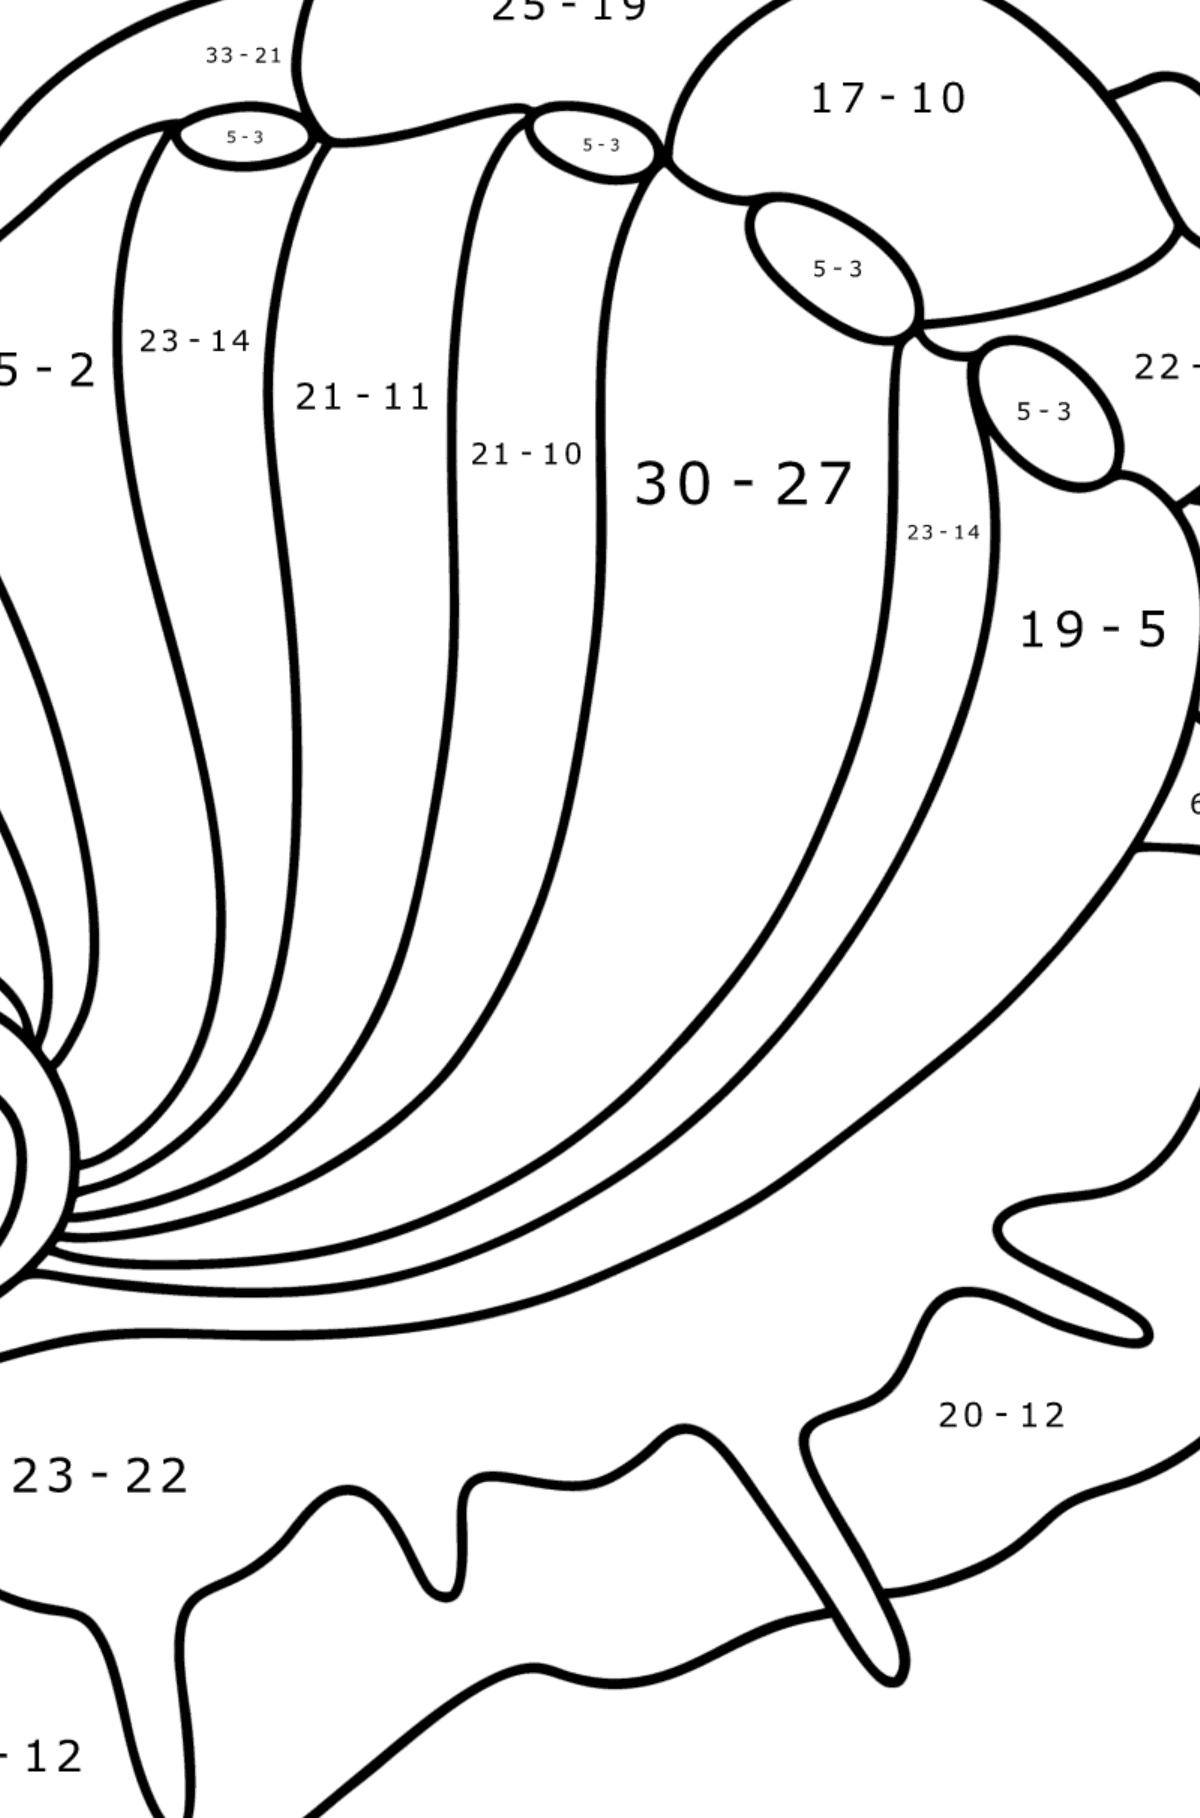 Mollusk abalone coloring page - Math Coloring - Subtraction for Kids